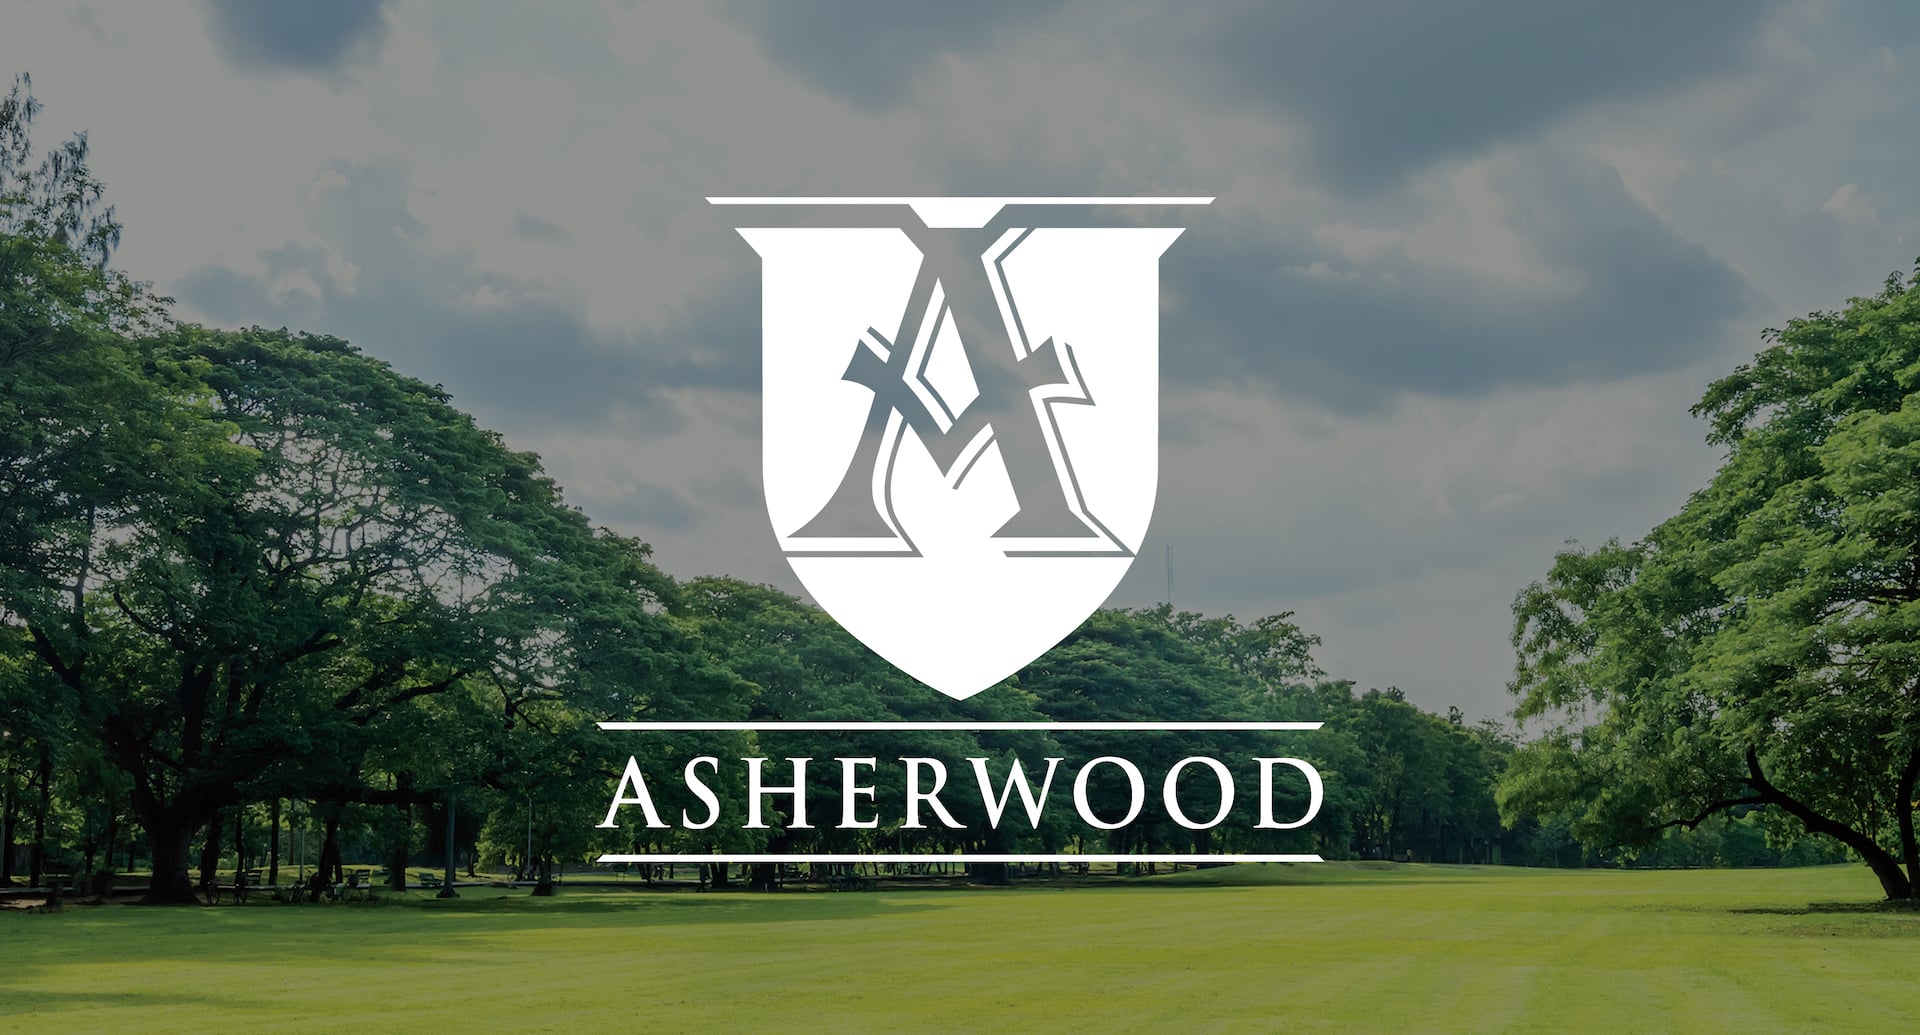 The logo for Asherwood Golf Club, a luxury custom home builder in Westfield and Carmel Indiana.